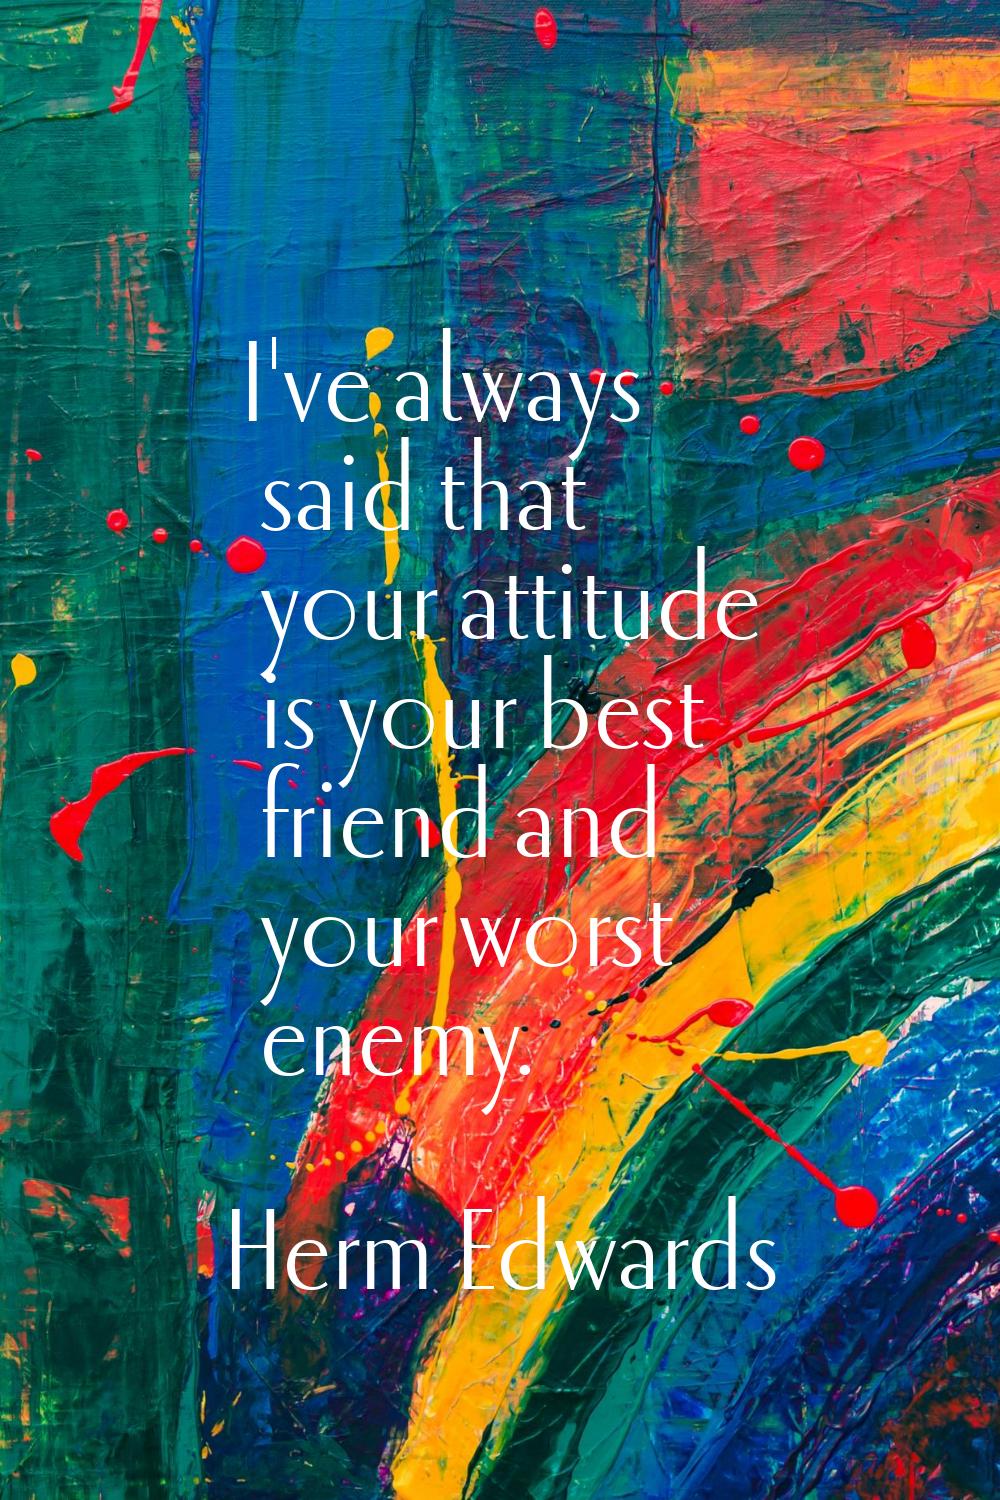 I've always said that your attitude is your best friend and your worst enemy.